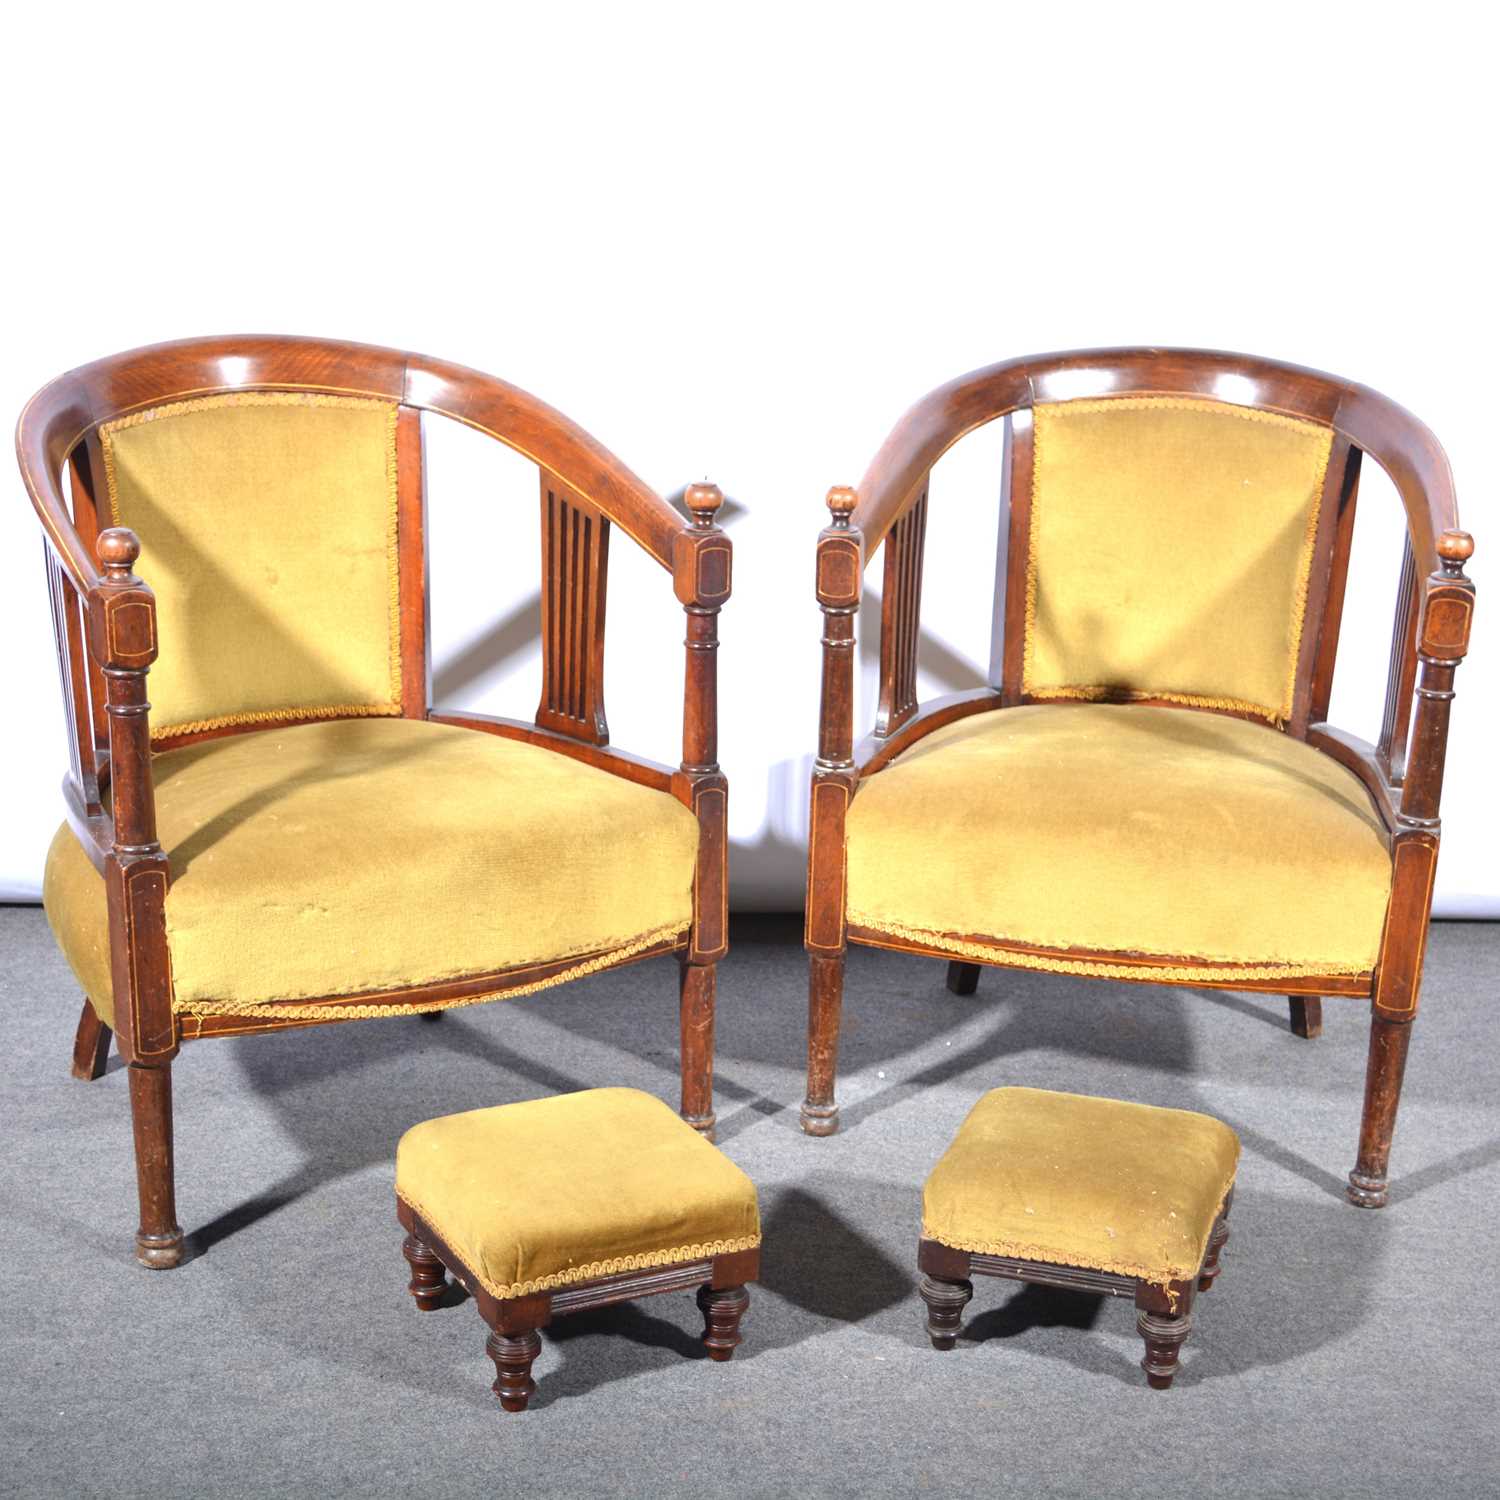 Lot 591 - Pair of tub chairs and stools.